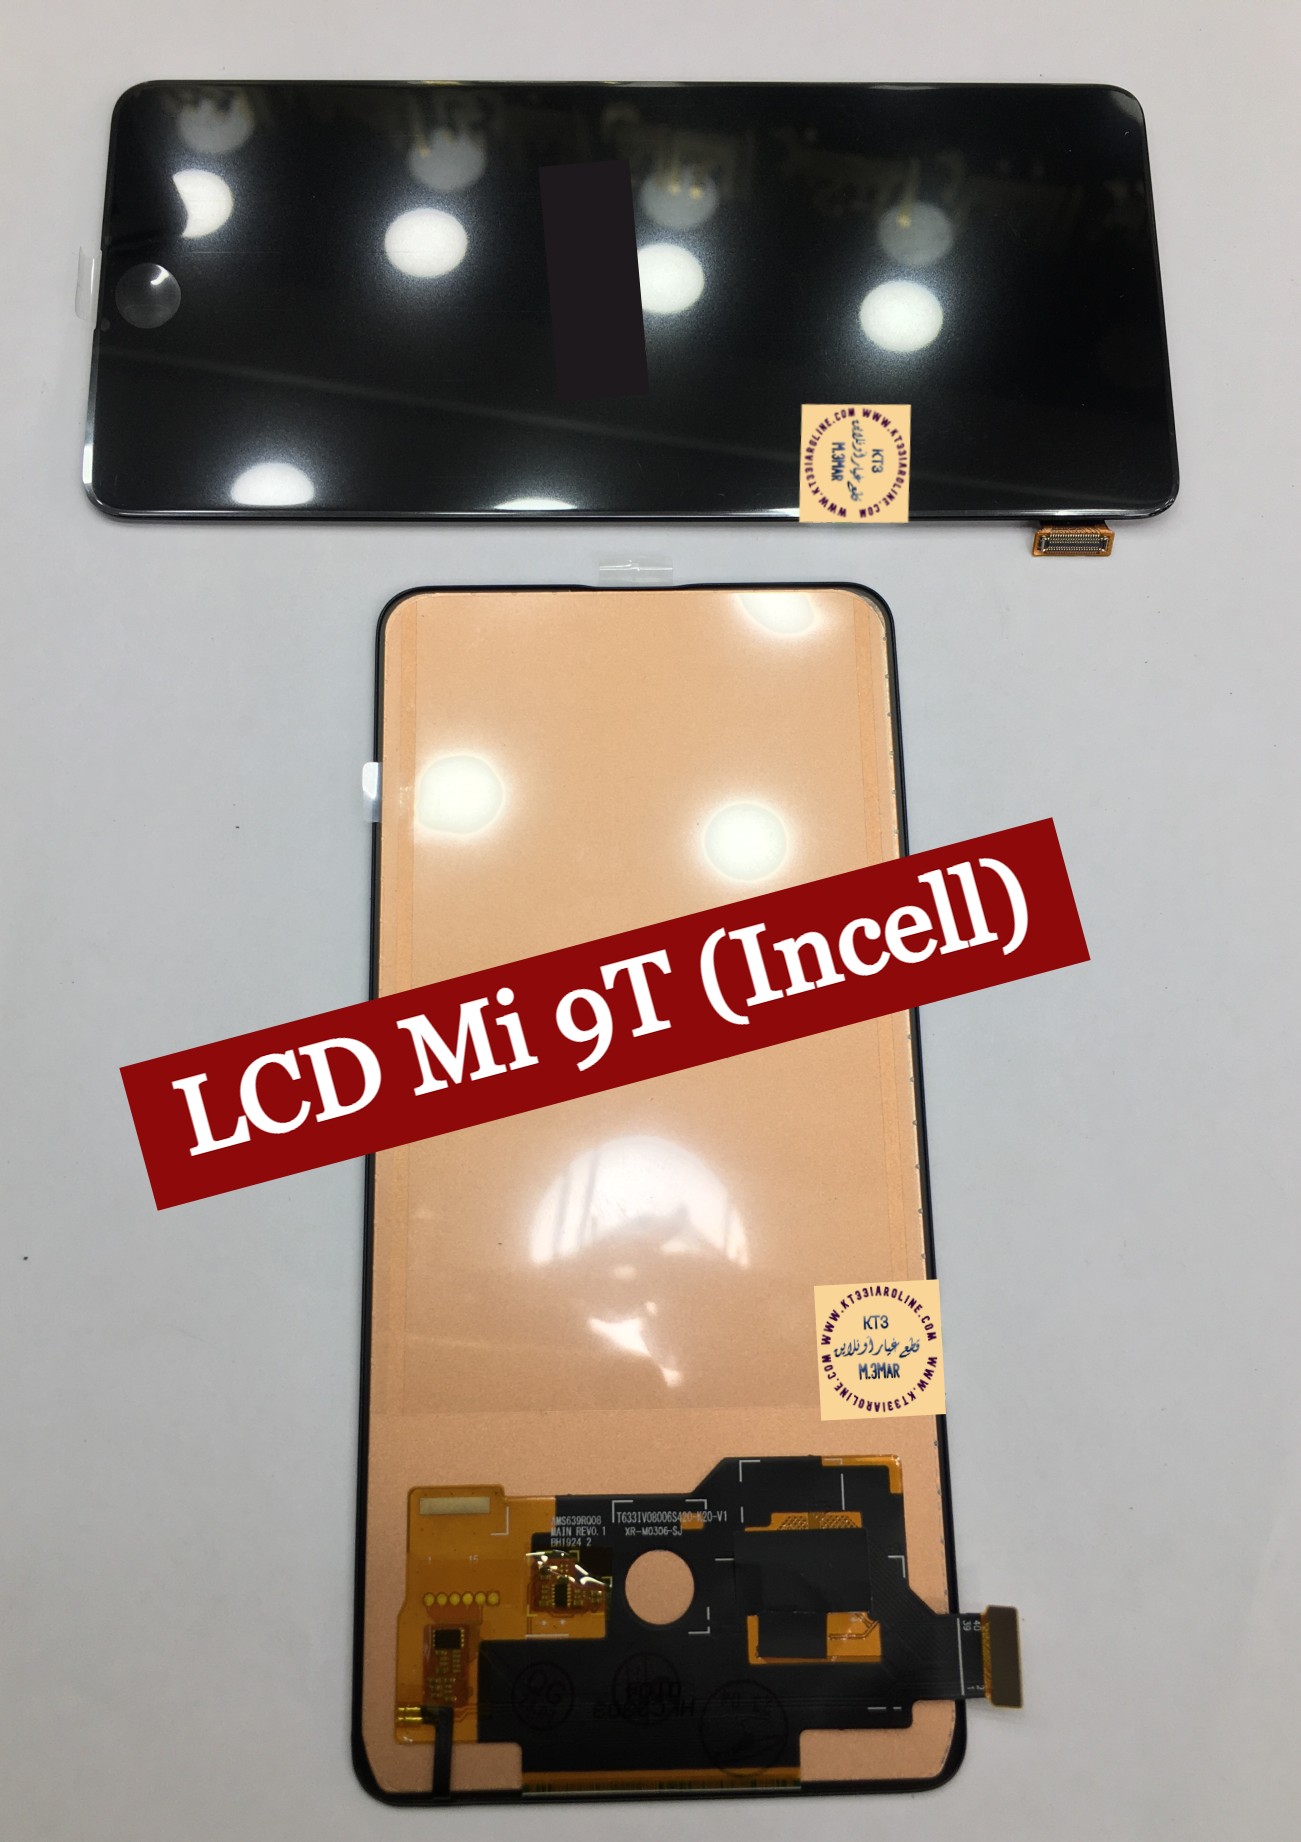 lcd price mi 9t incell